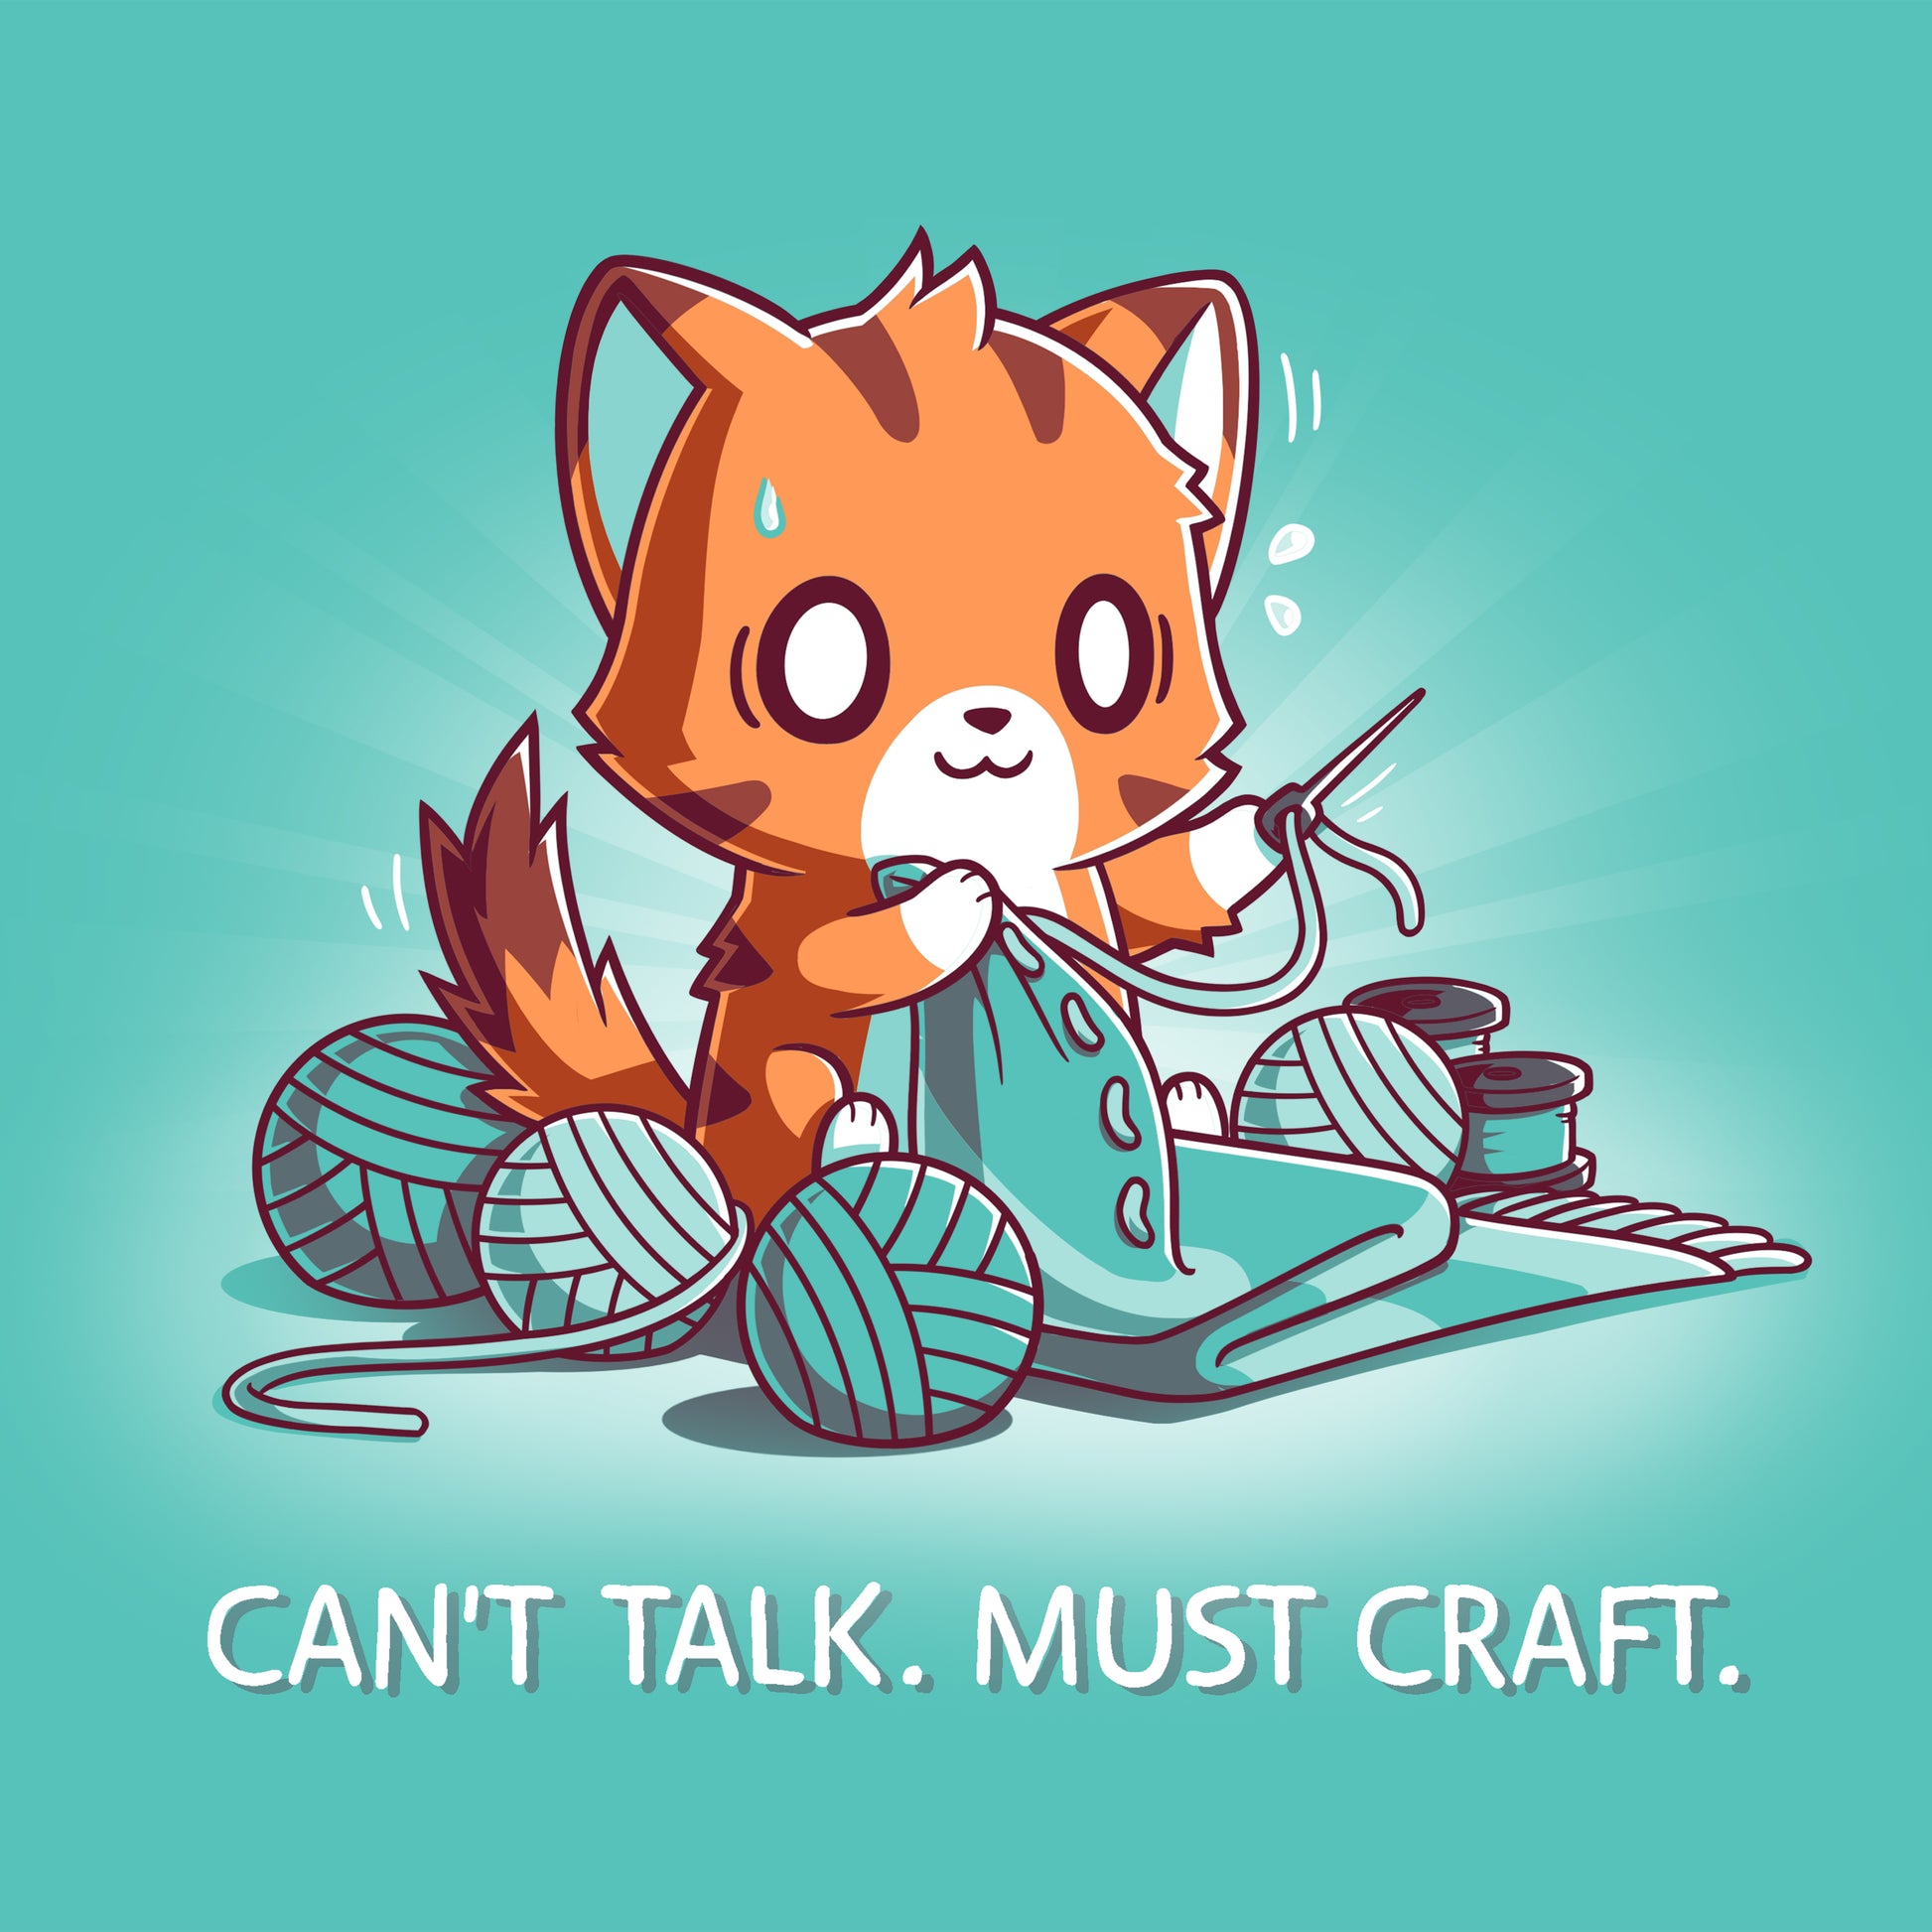 A cartoon fox is knitting with multiple yarn balls around and has a concentrated expression on a Can’t Talk. Must Craft Caribbean blue t-shirt by monsterdigital. Text below reads, "CAN'T TALK. MUST CRAFT.